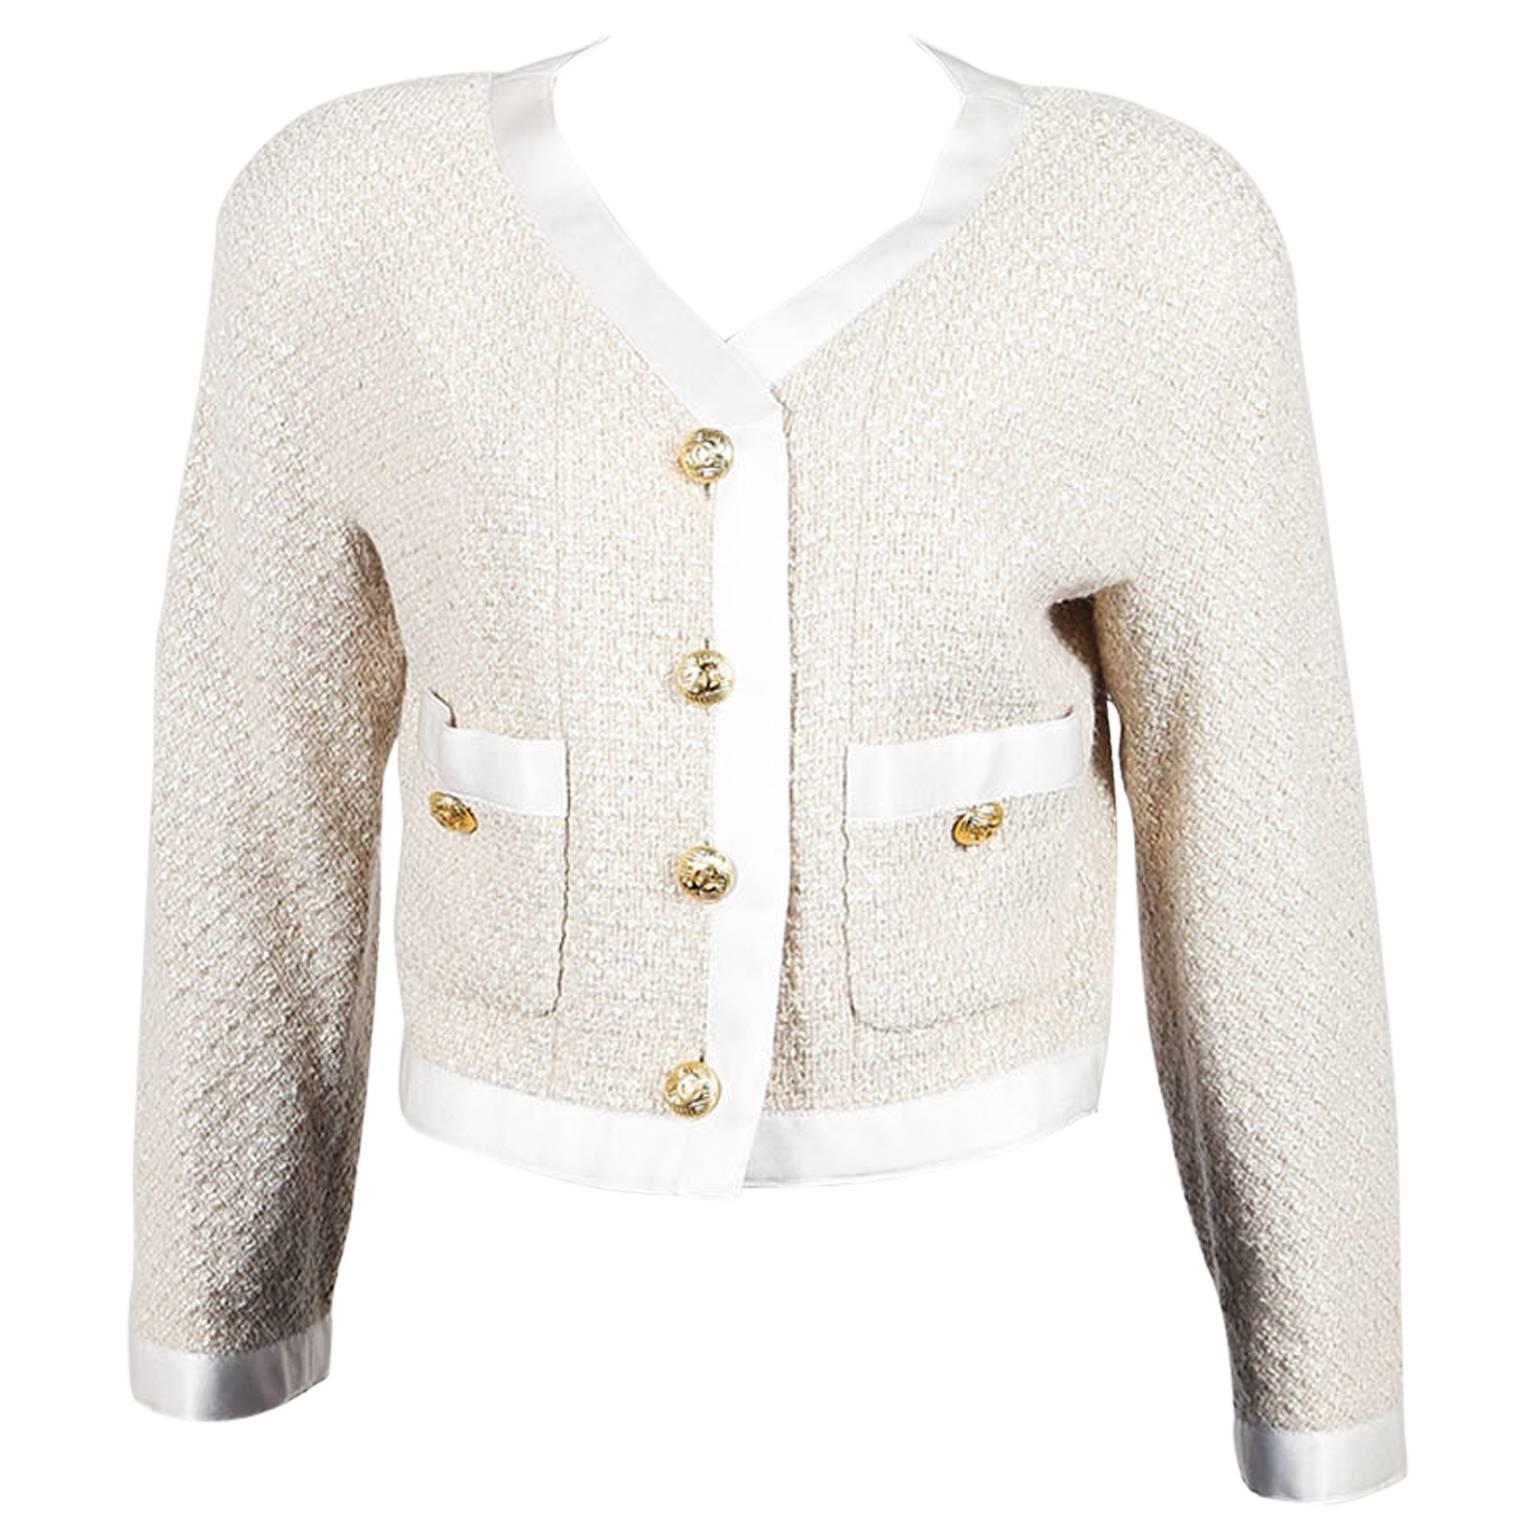 Vintage Chanel Beige Wool Silk Textured Knit 'CC' Button Cropped Jacket SZ 42 For Sale